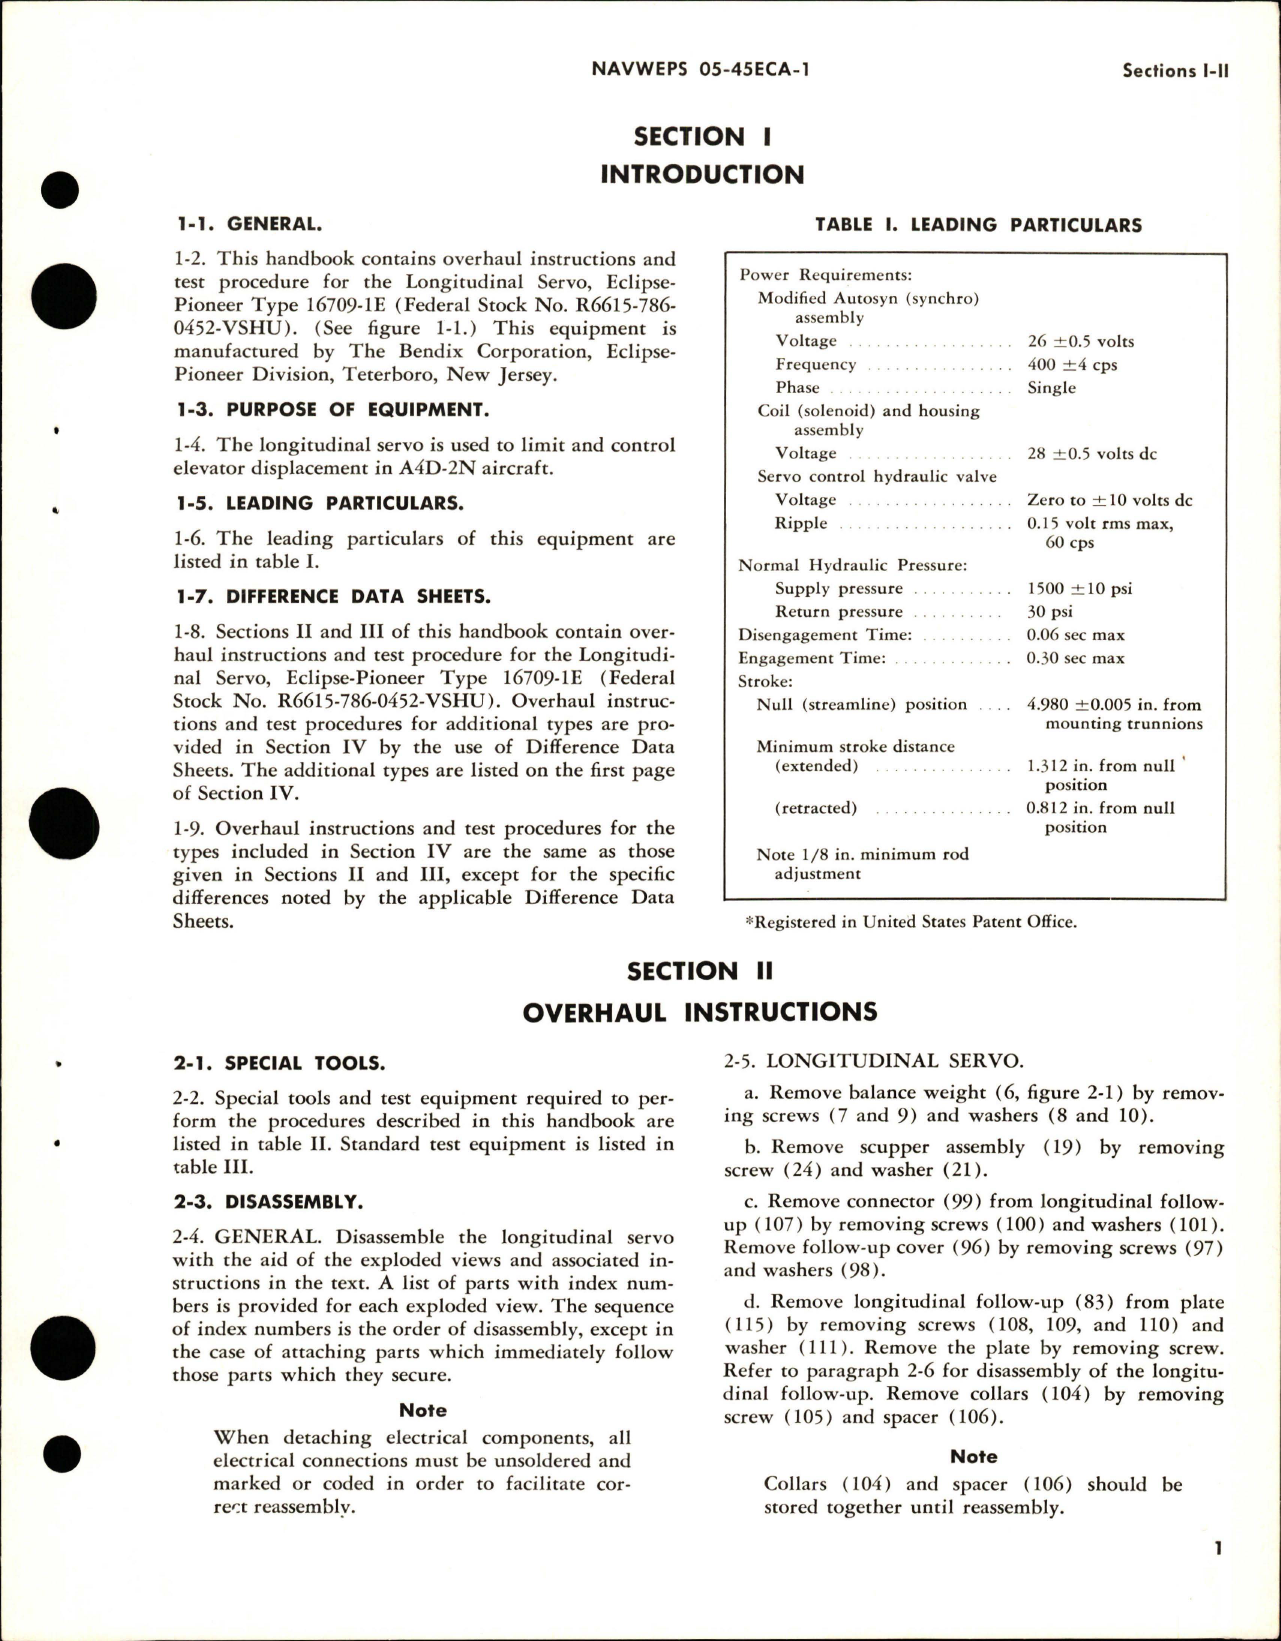 Sample page 5 from AirCorps Library document: Overhaul Instructions for Longitudinal Servo - Parts 16709-1E and 16731-1A